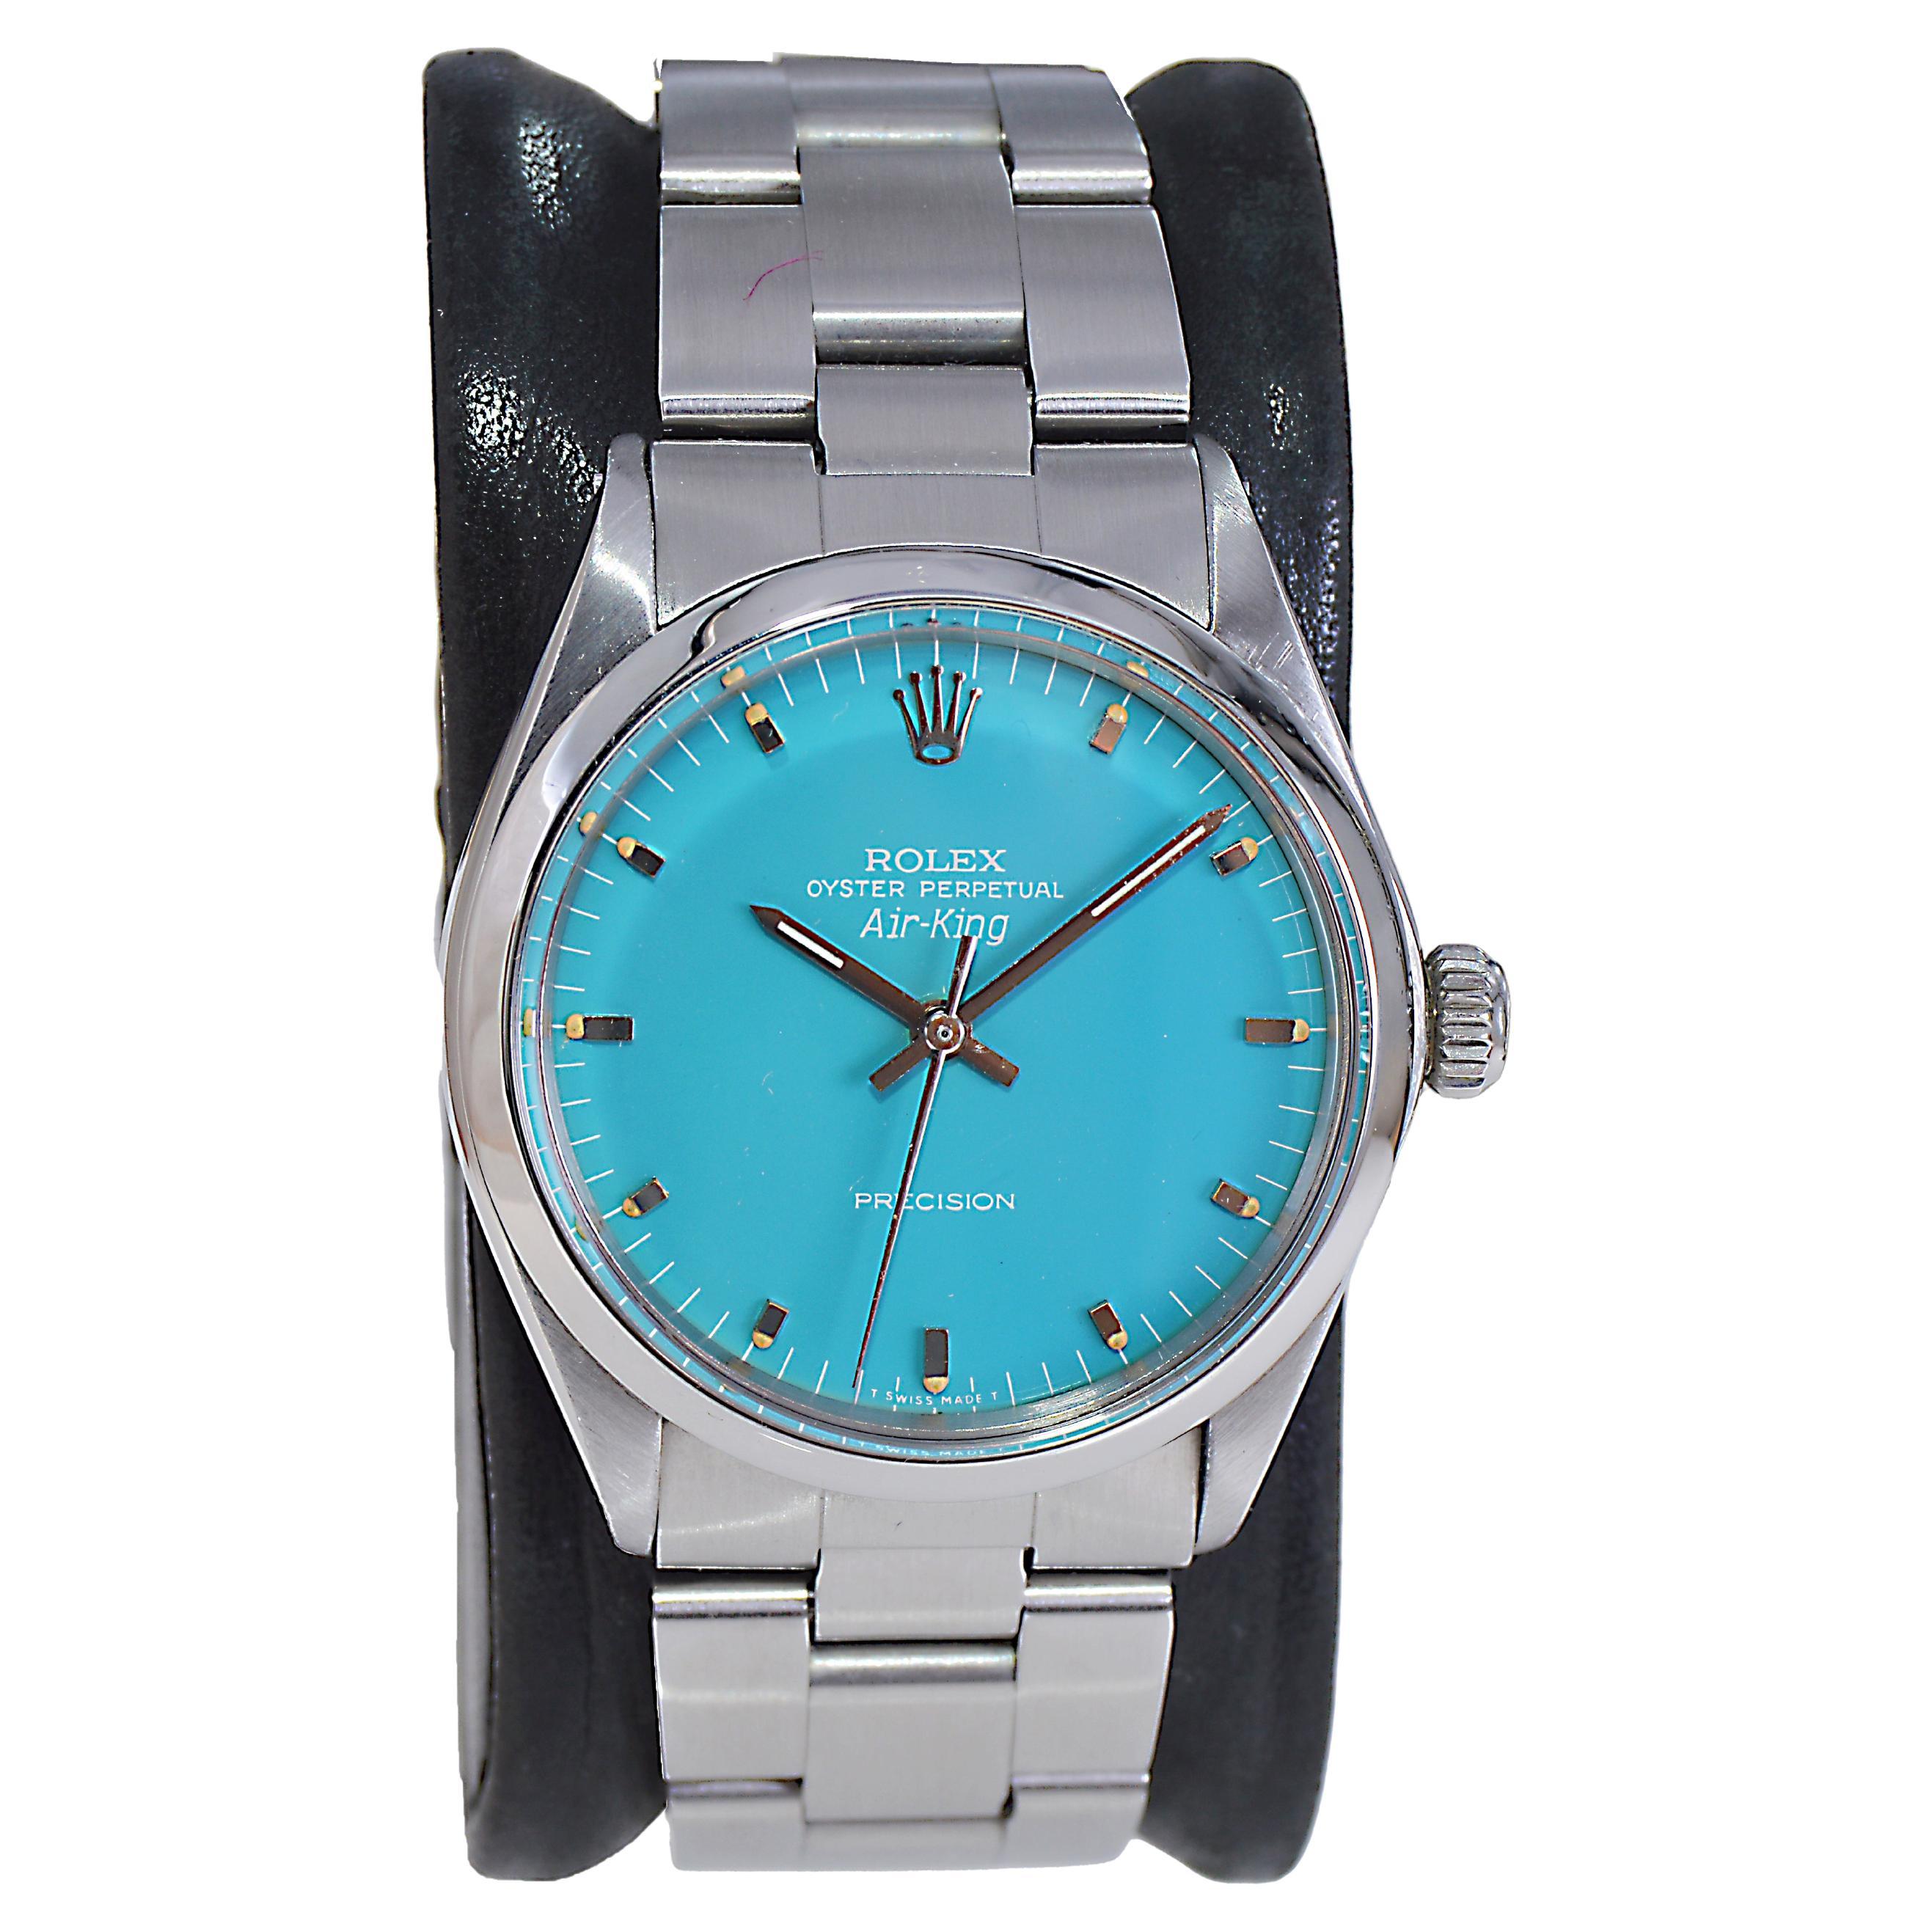 Rolex Stainless Steel Air King with Custom Made Sky Blue Dial from Mid-1970's